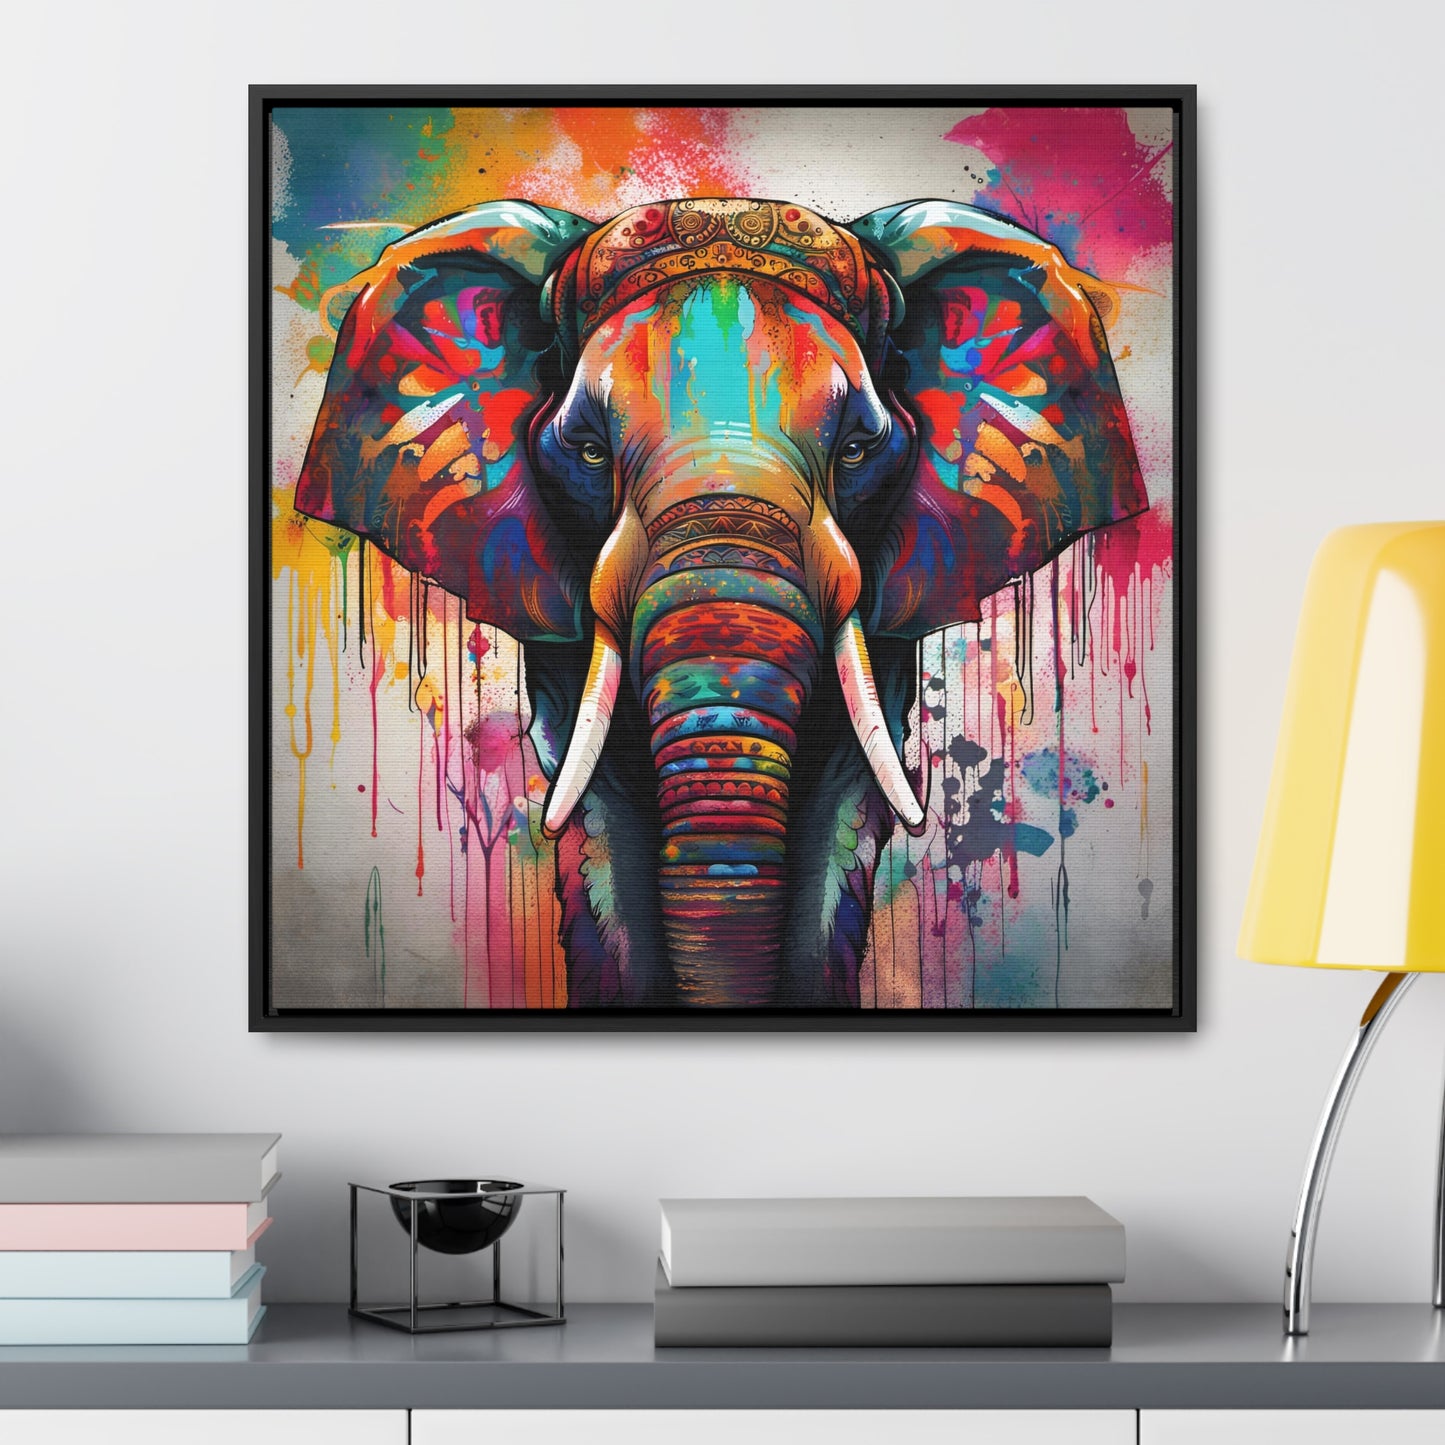 Dripping Colors Indian Elephant Print on Canvas in a Floating Frame 24x24